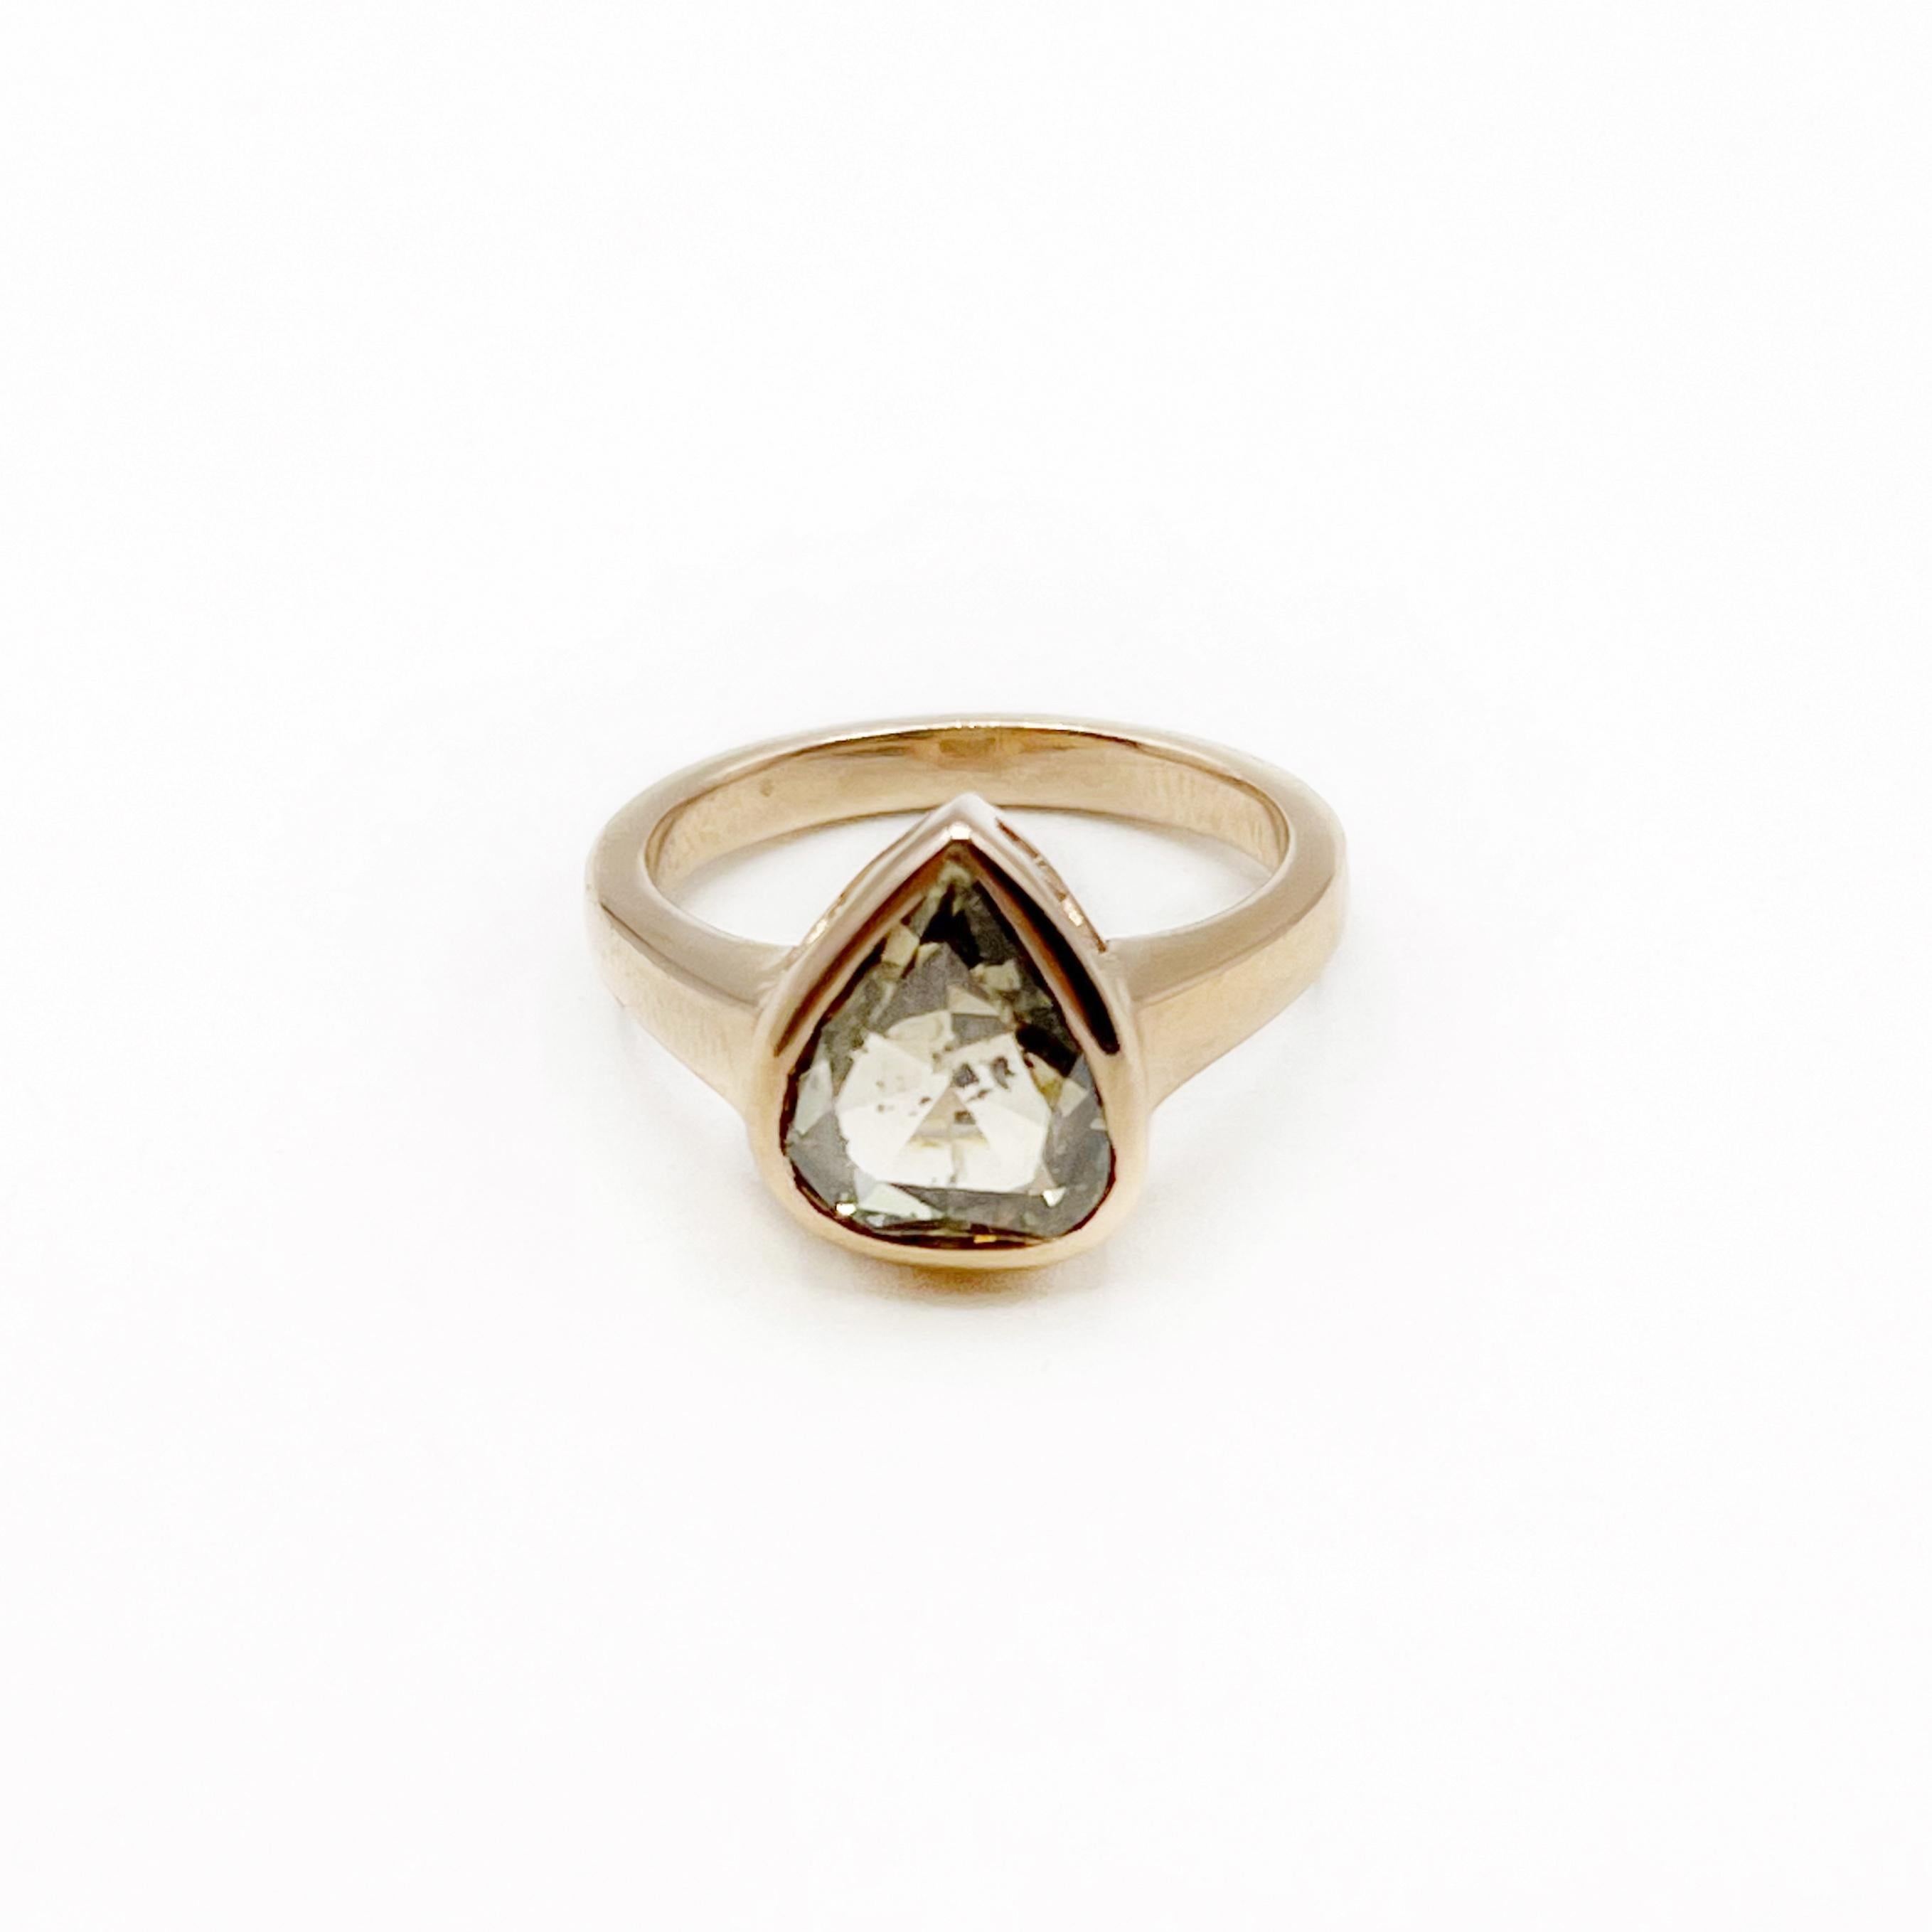 This mesmerizing diamond is a 3.07 carat pear shape rose cut with a cognac hue. The 18 karat rose gold setting is the perfect compliment for this yummy diamond. The setting has an open basket design to create a beautiful side view. Wear every day